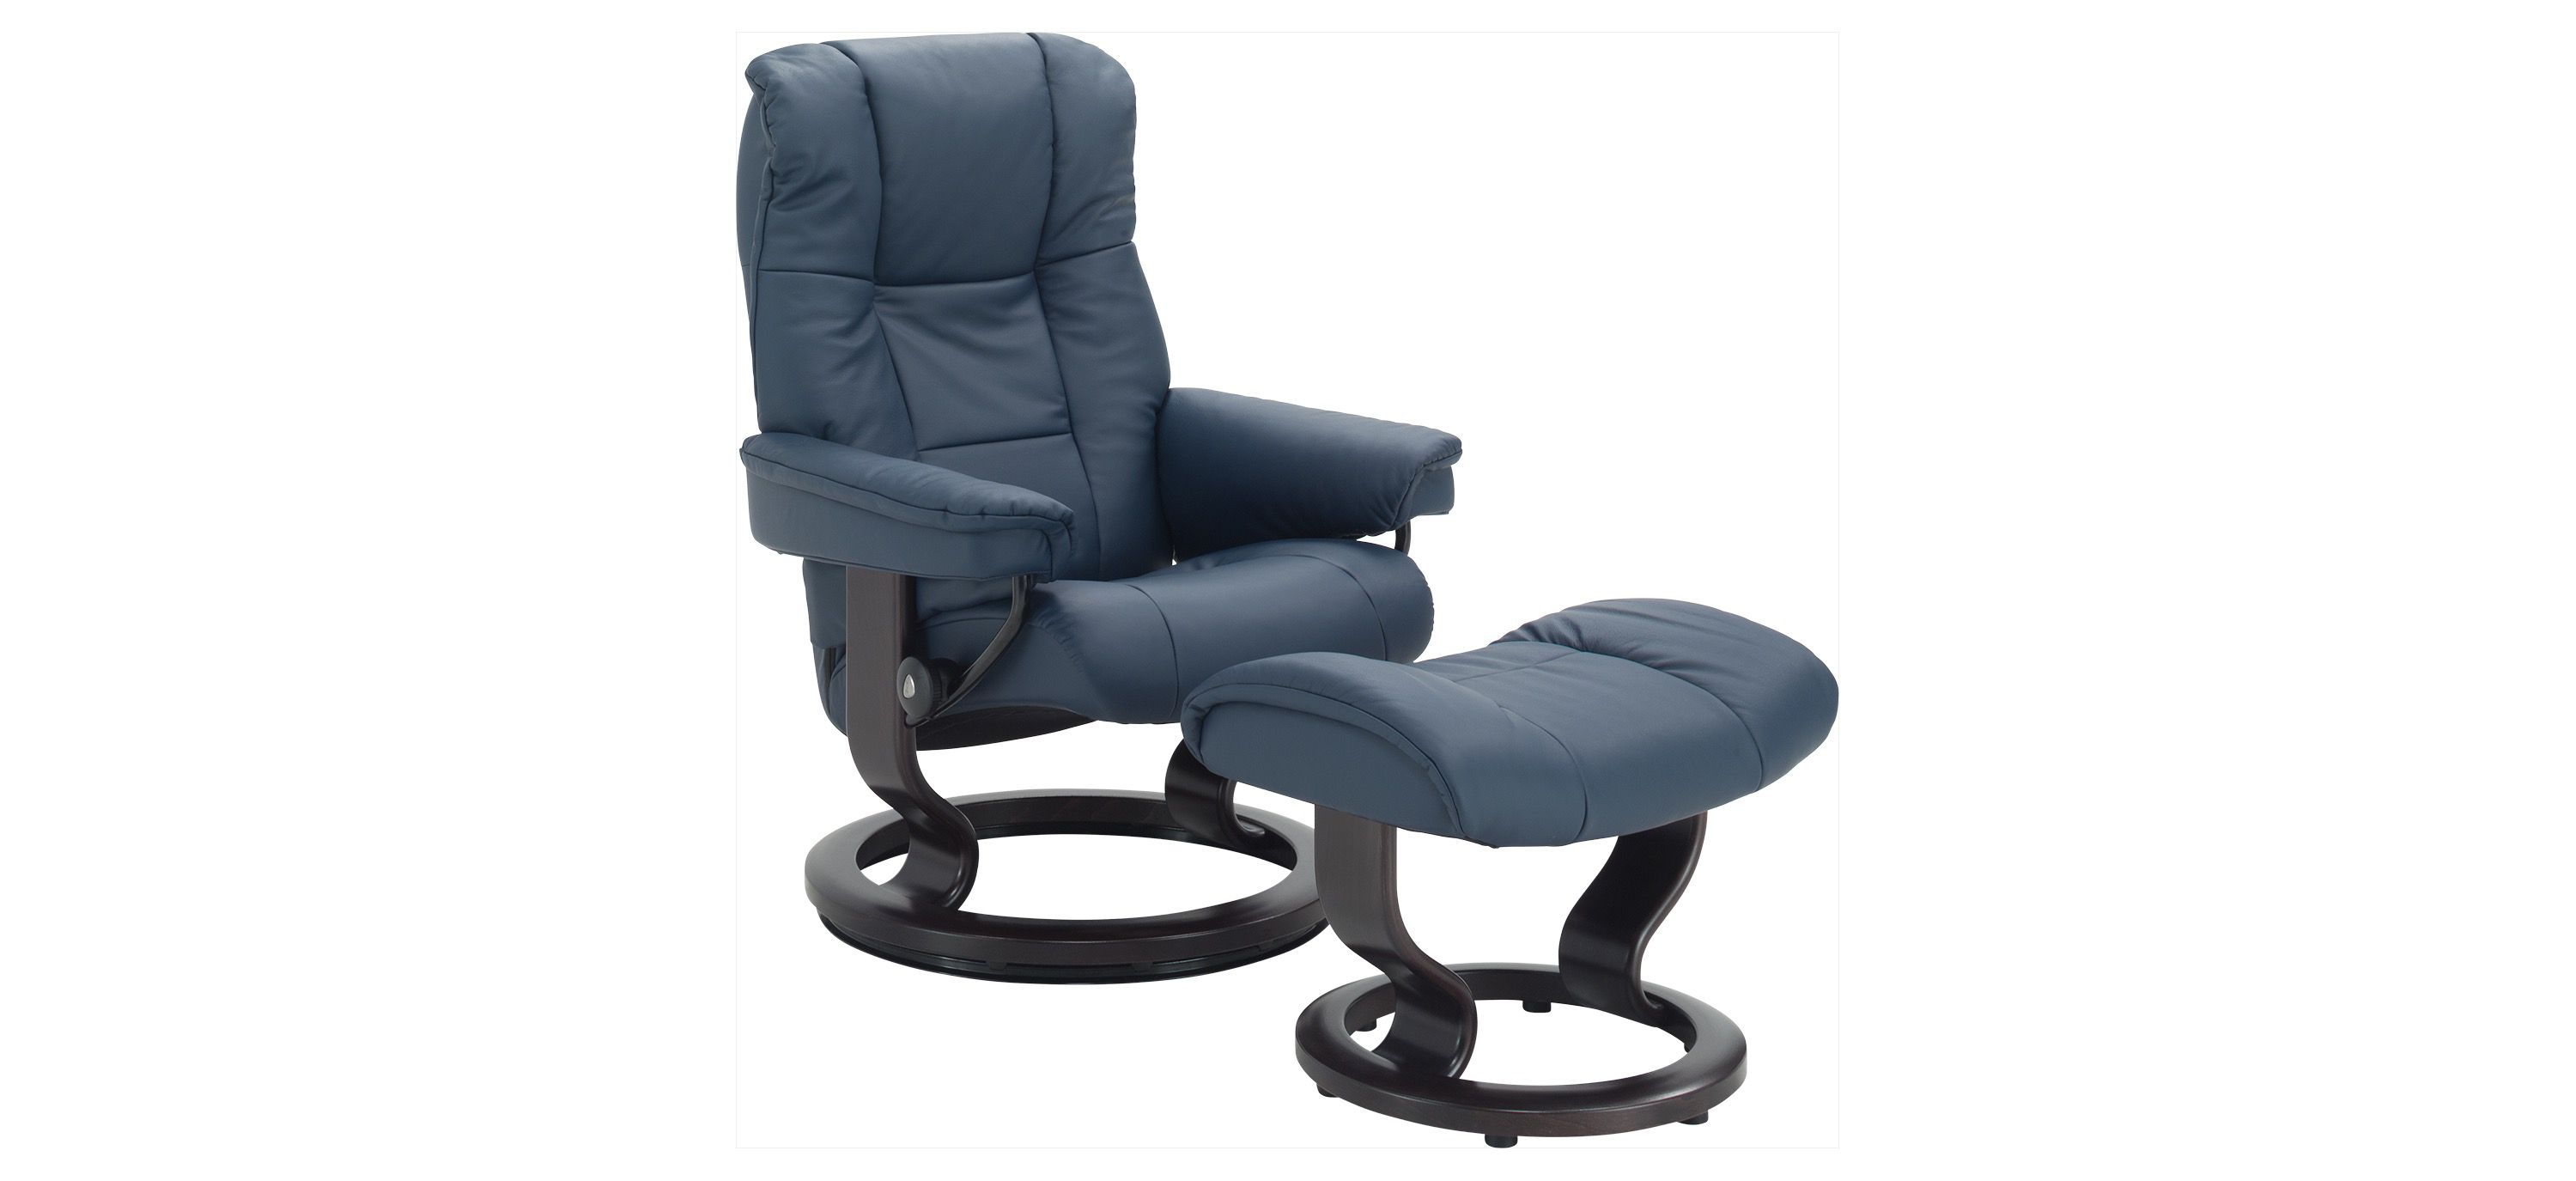 Stressless Mayfair Small Leather Reclining Chair and Ottoman